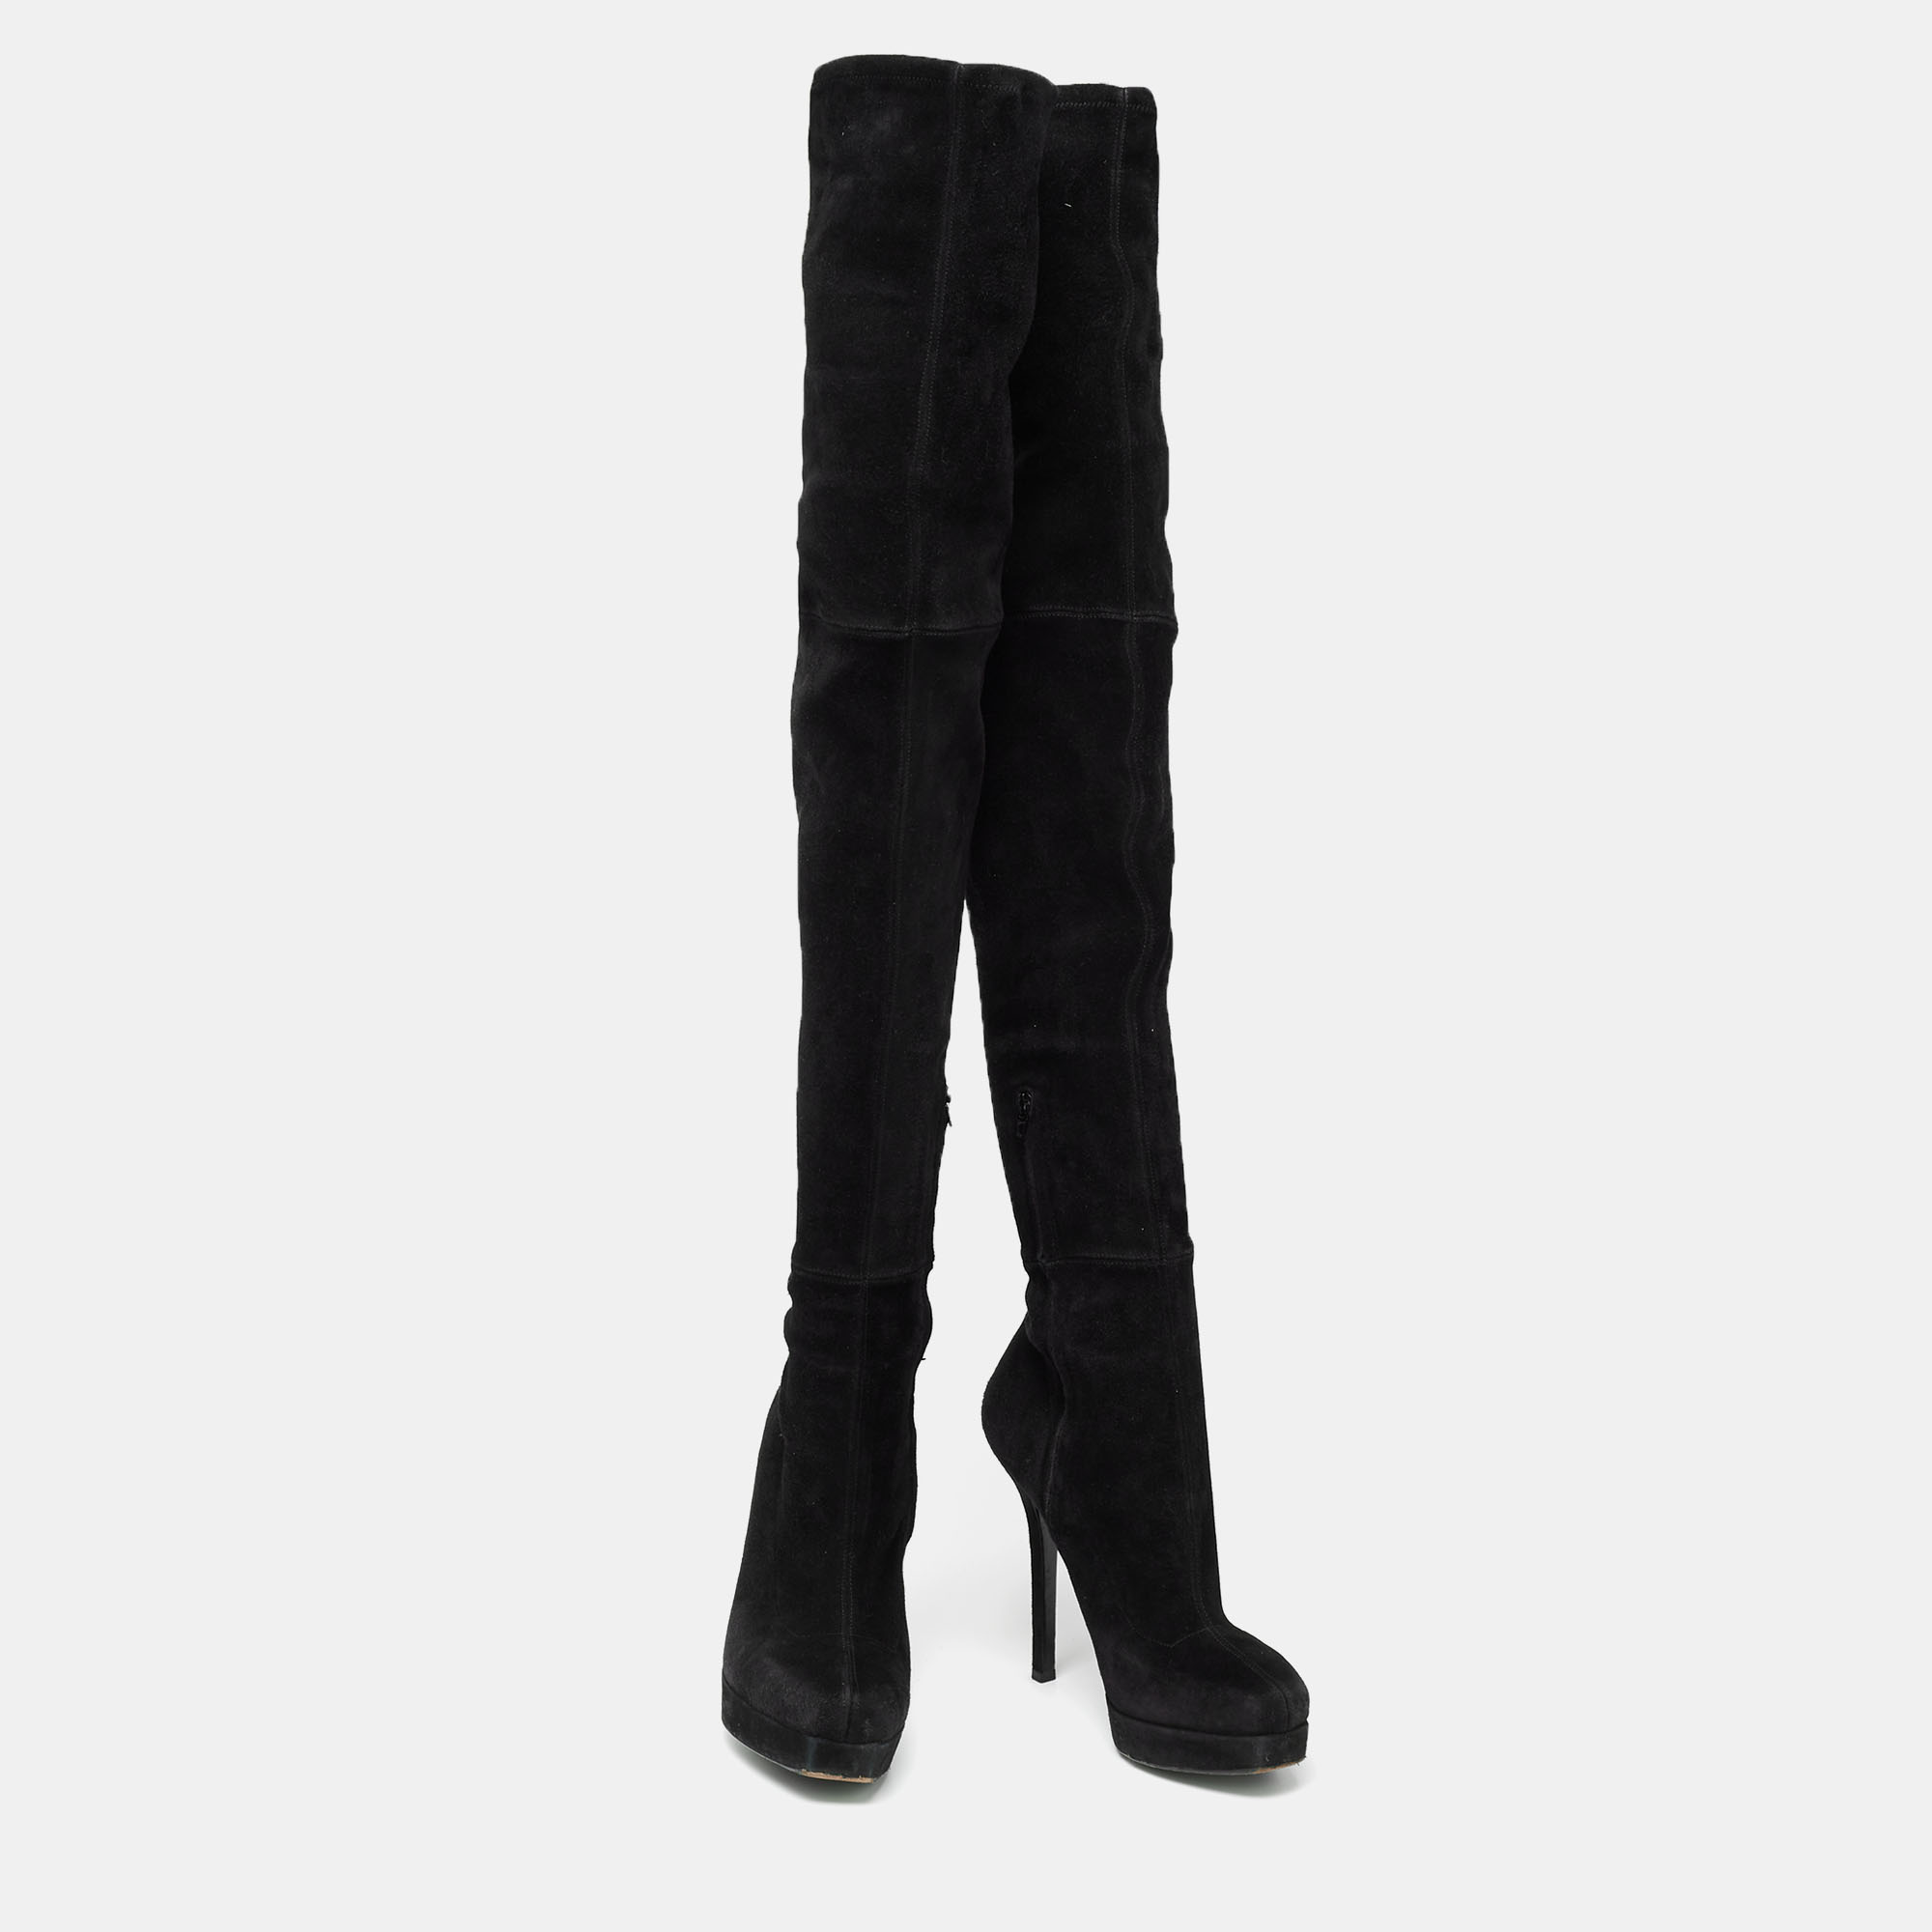 Gucci Black Suede Platform Over The Knee Boots Size 38.5